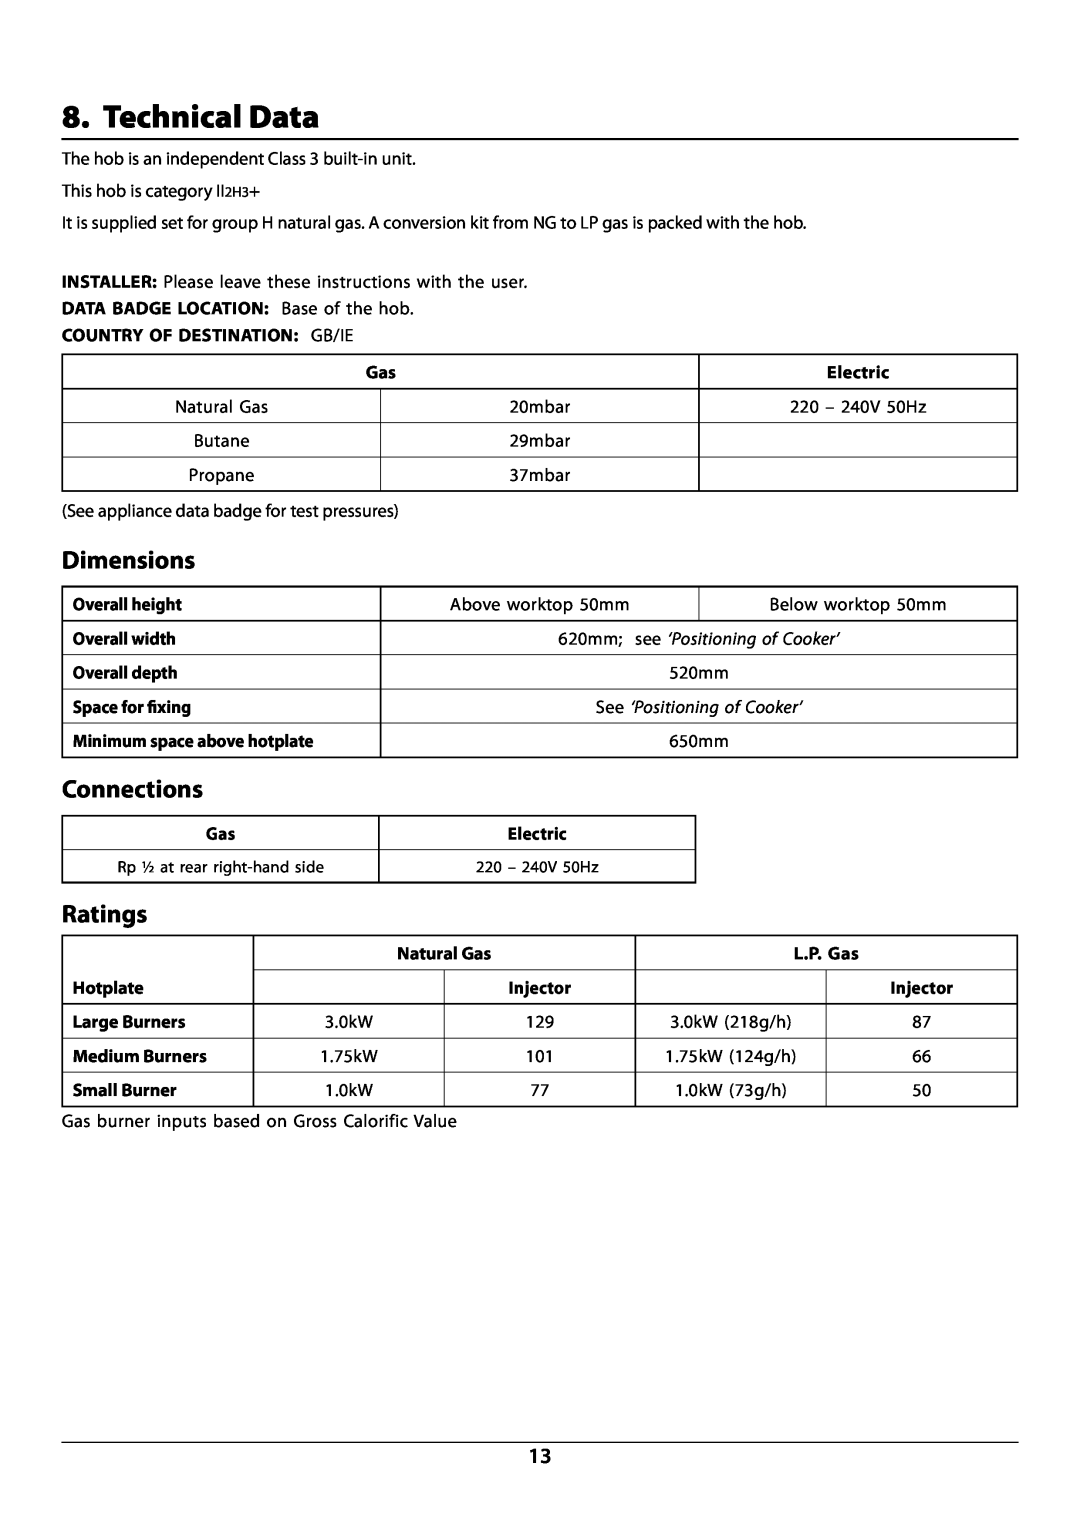 Rangemaster manual Technical Data, Dimensions, Connections, Ratings, DocNo.101-0001 - Technical data RG60 gas, Electric 